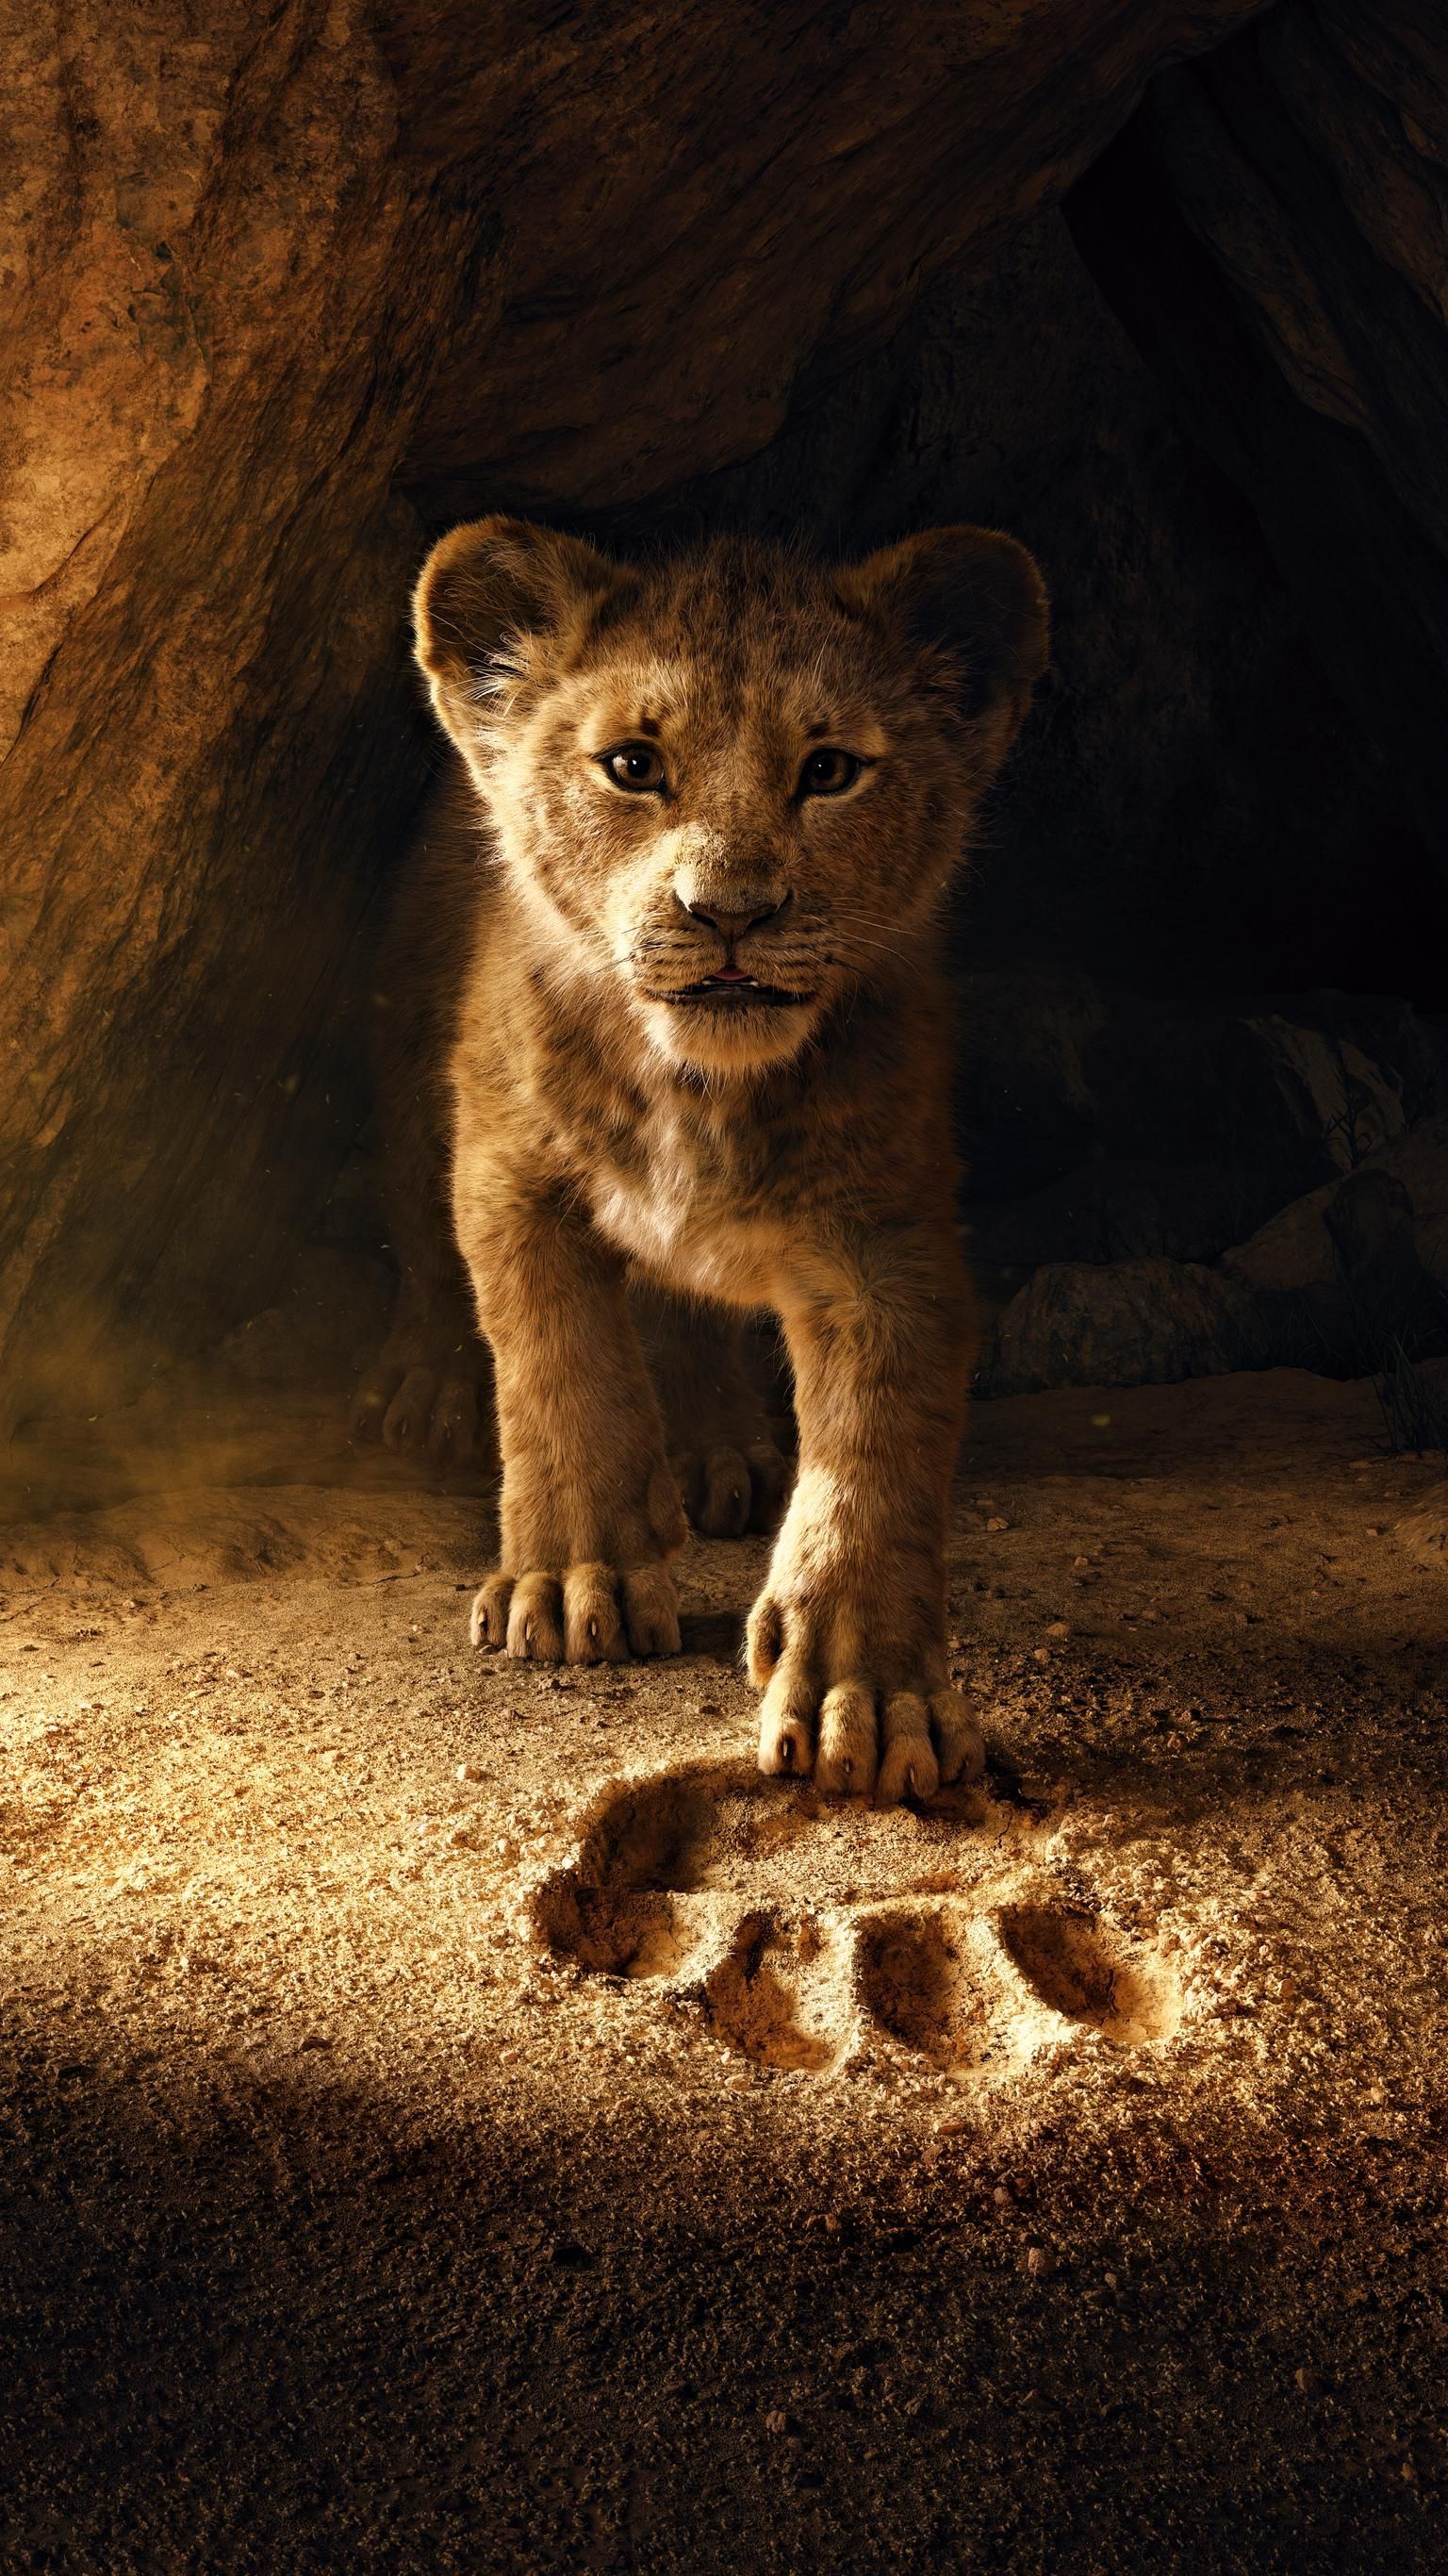 The Lion King (2019) Phone Wallpaper. Moviemania. Lion king picture, Lion wallpaper, Lion king art